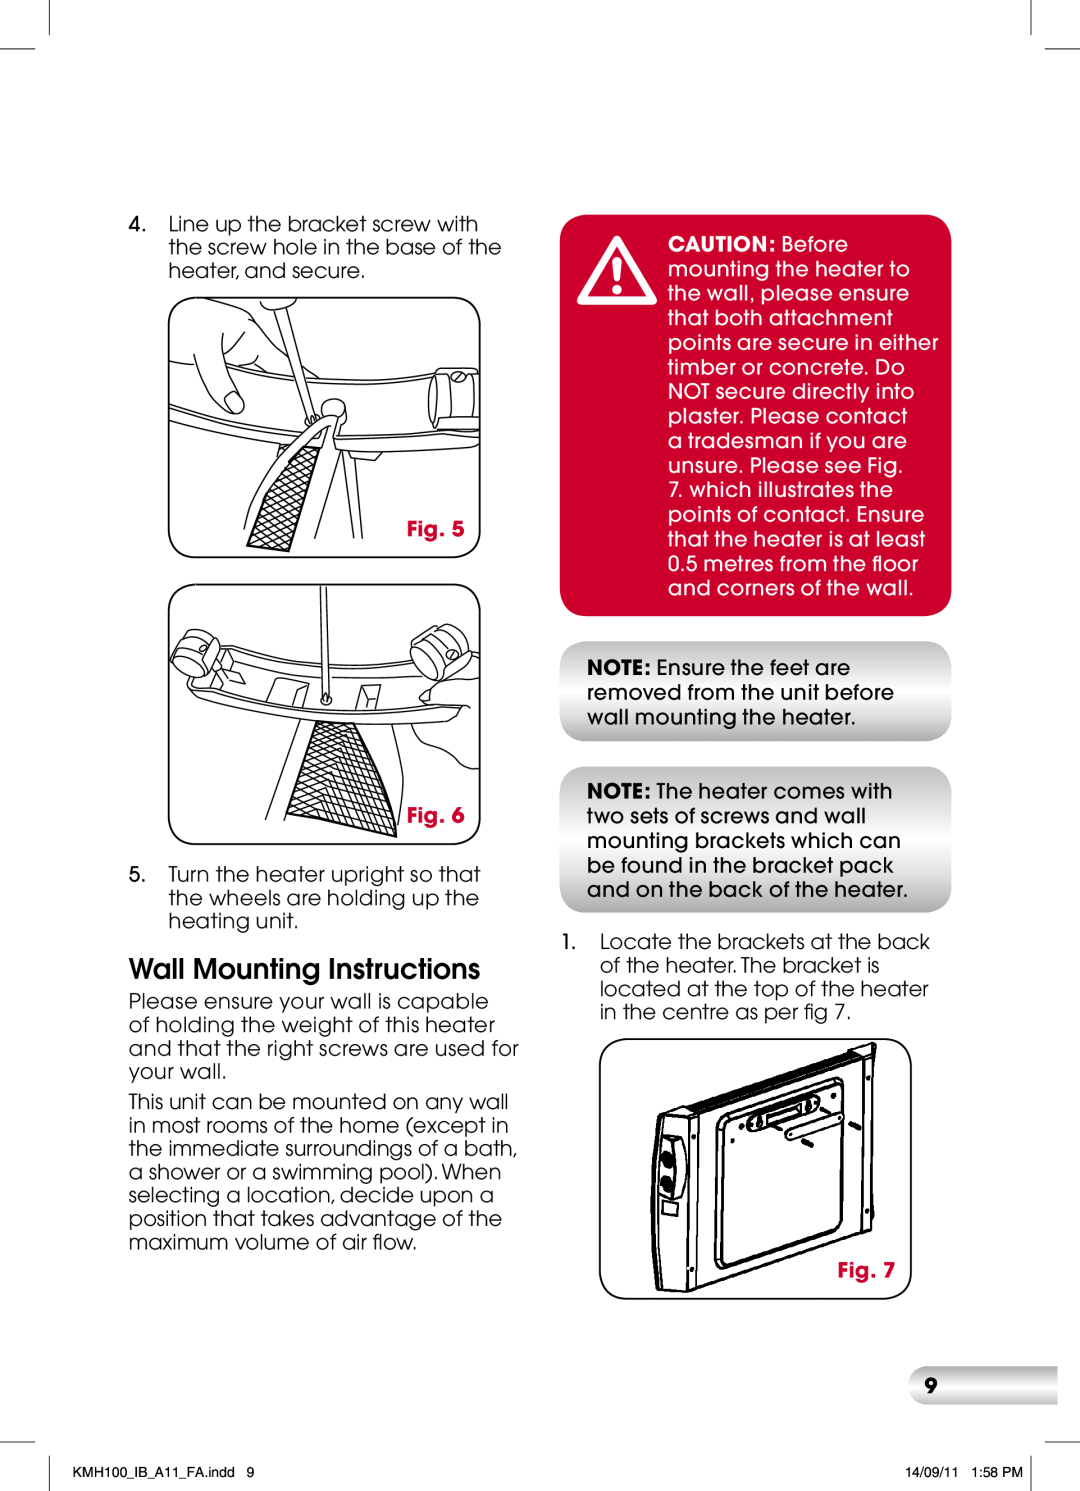 Kambrook KMH100 manual Wall Mounting Instructions, Fig. Fig 